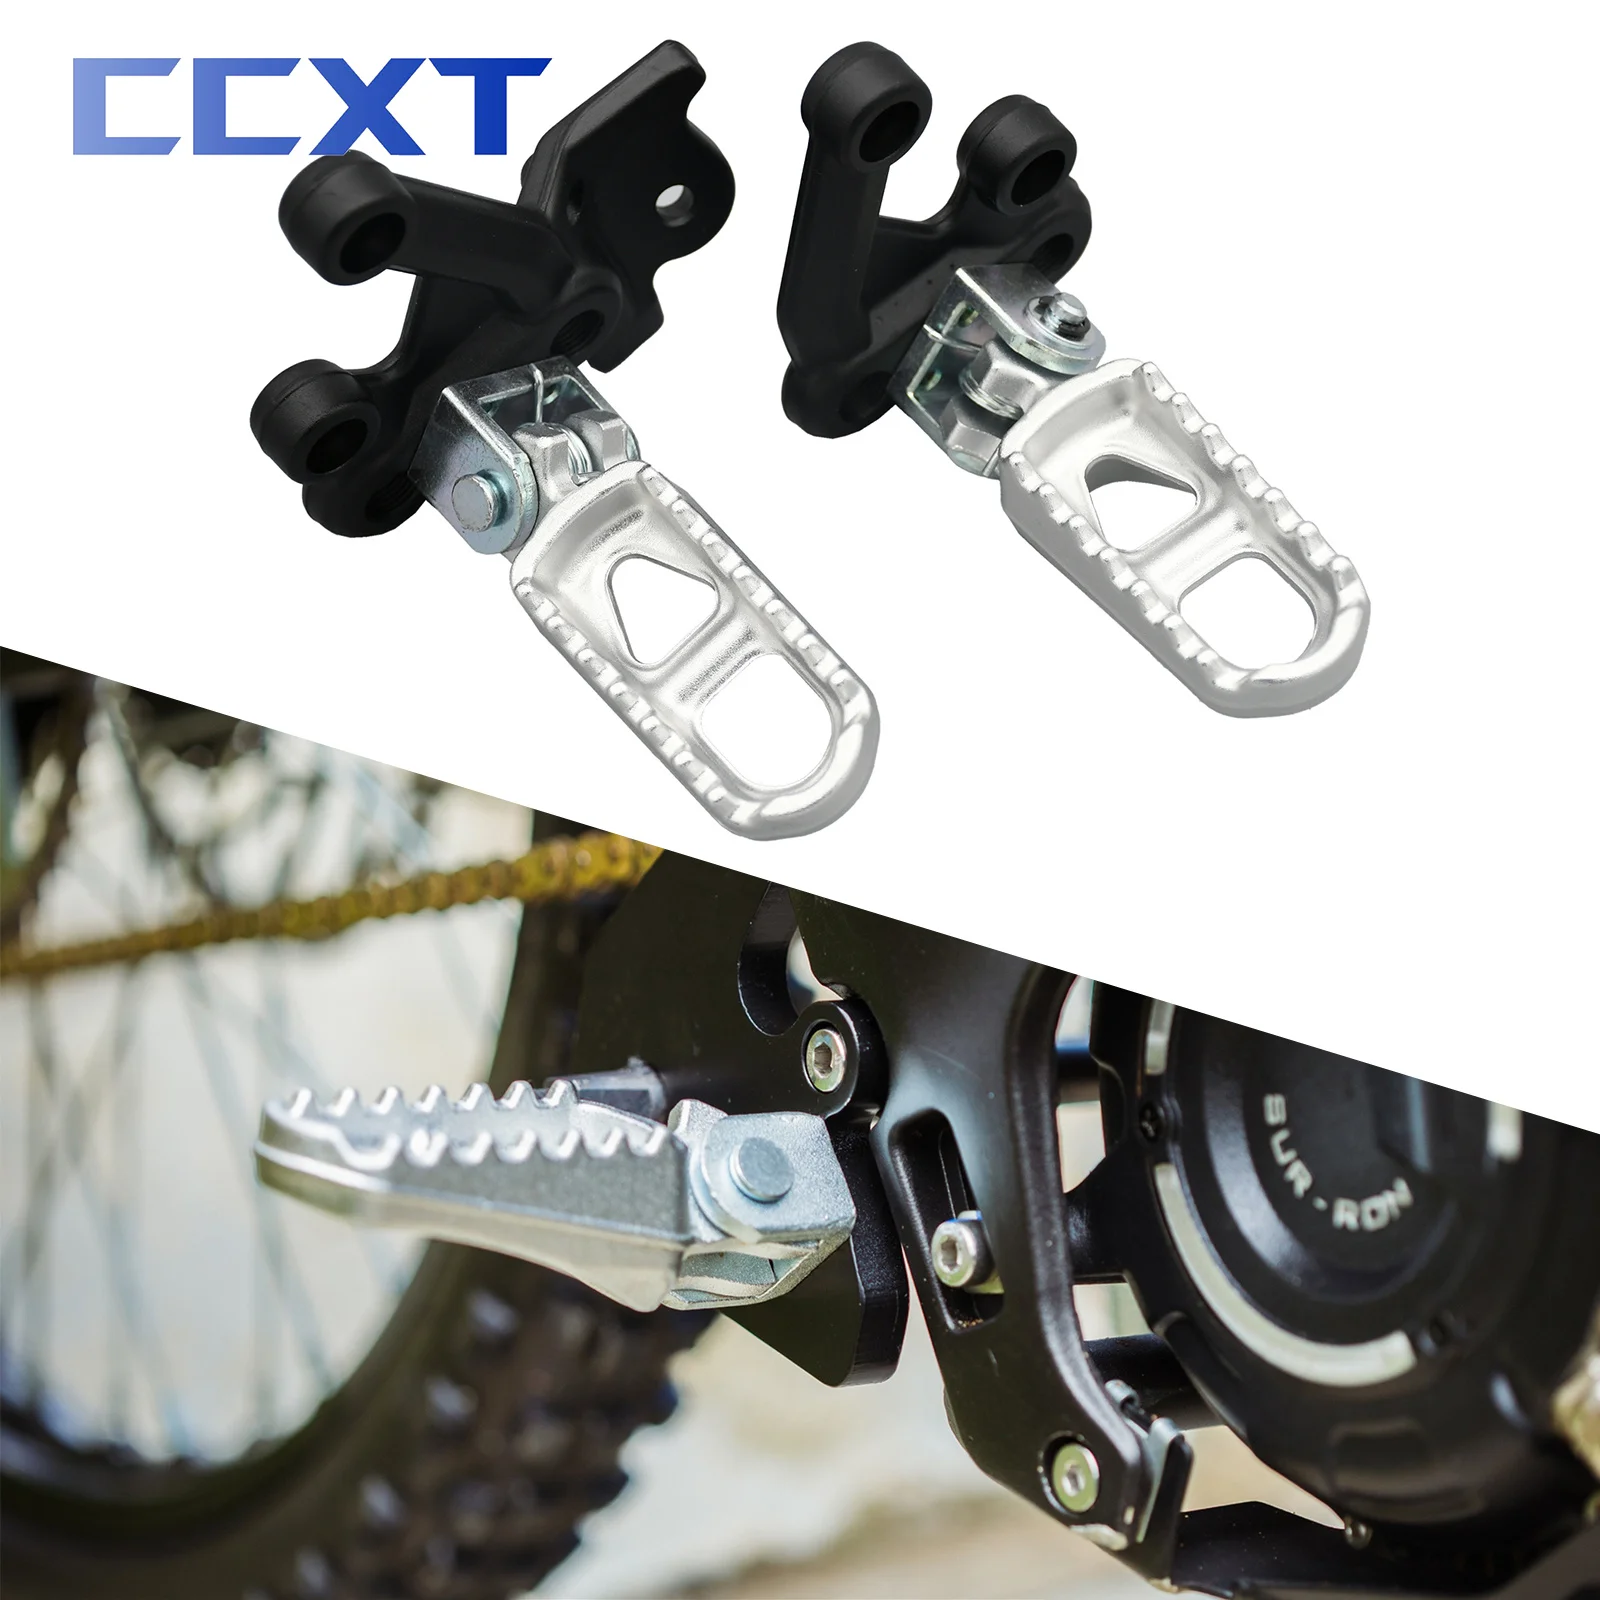 Electric Motocross Rests Pedals Footpegs Foot Pegs Bracket For Sur Ron S... - $15.72+